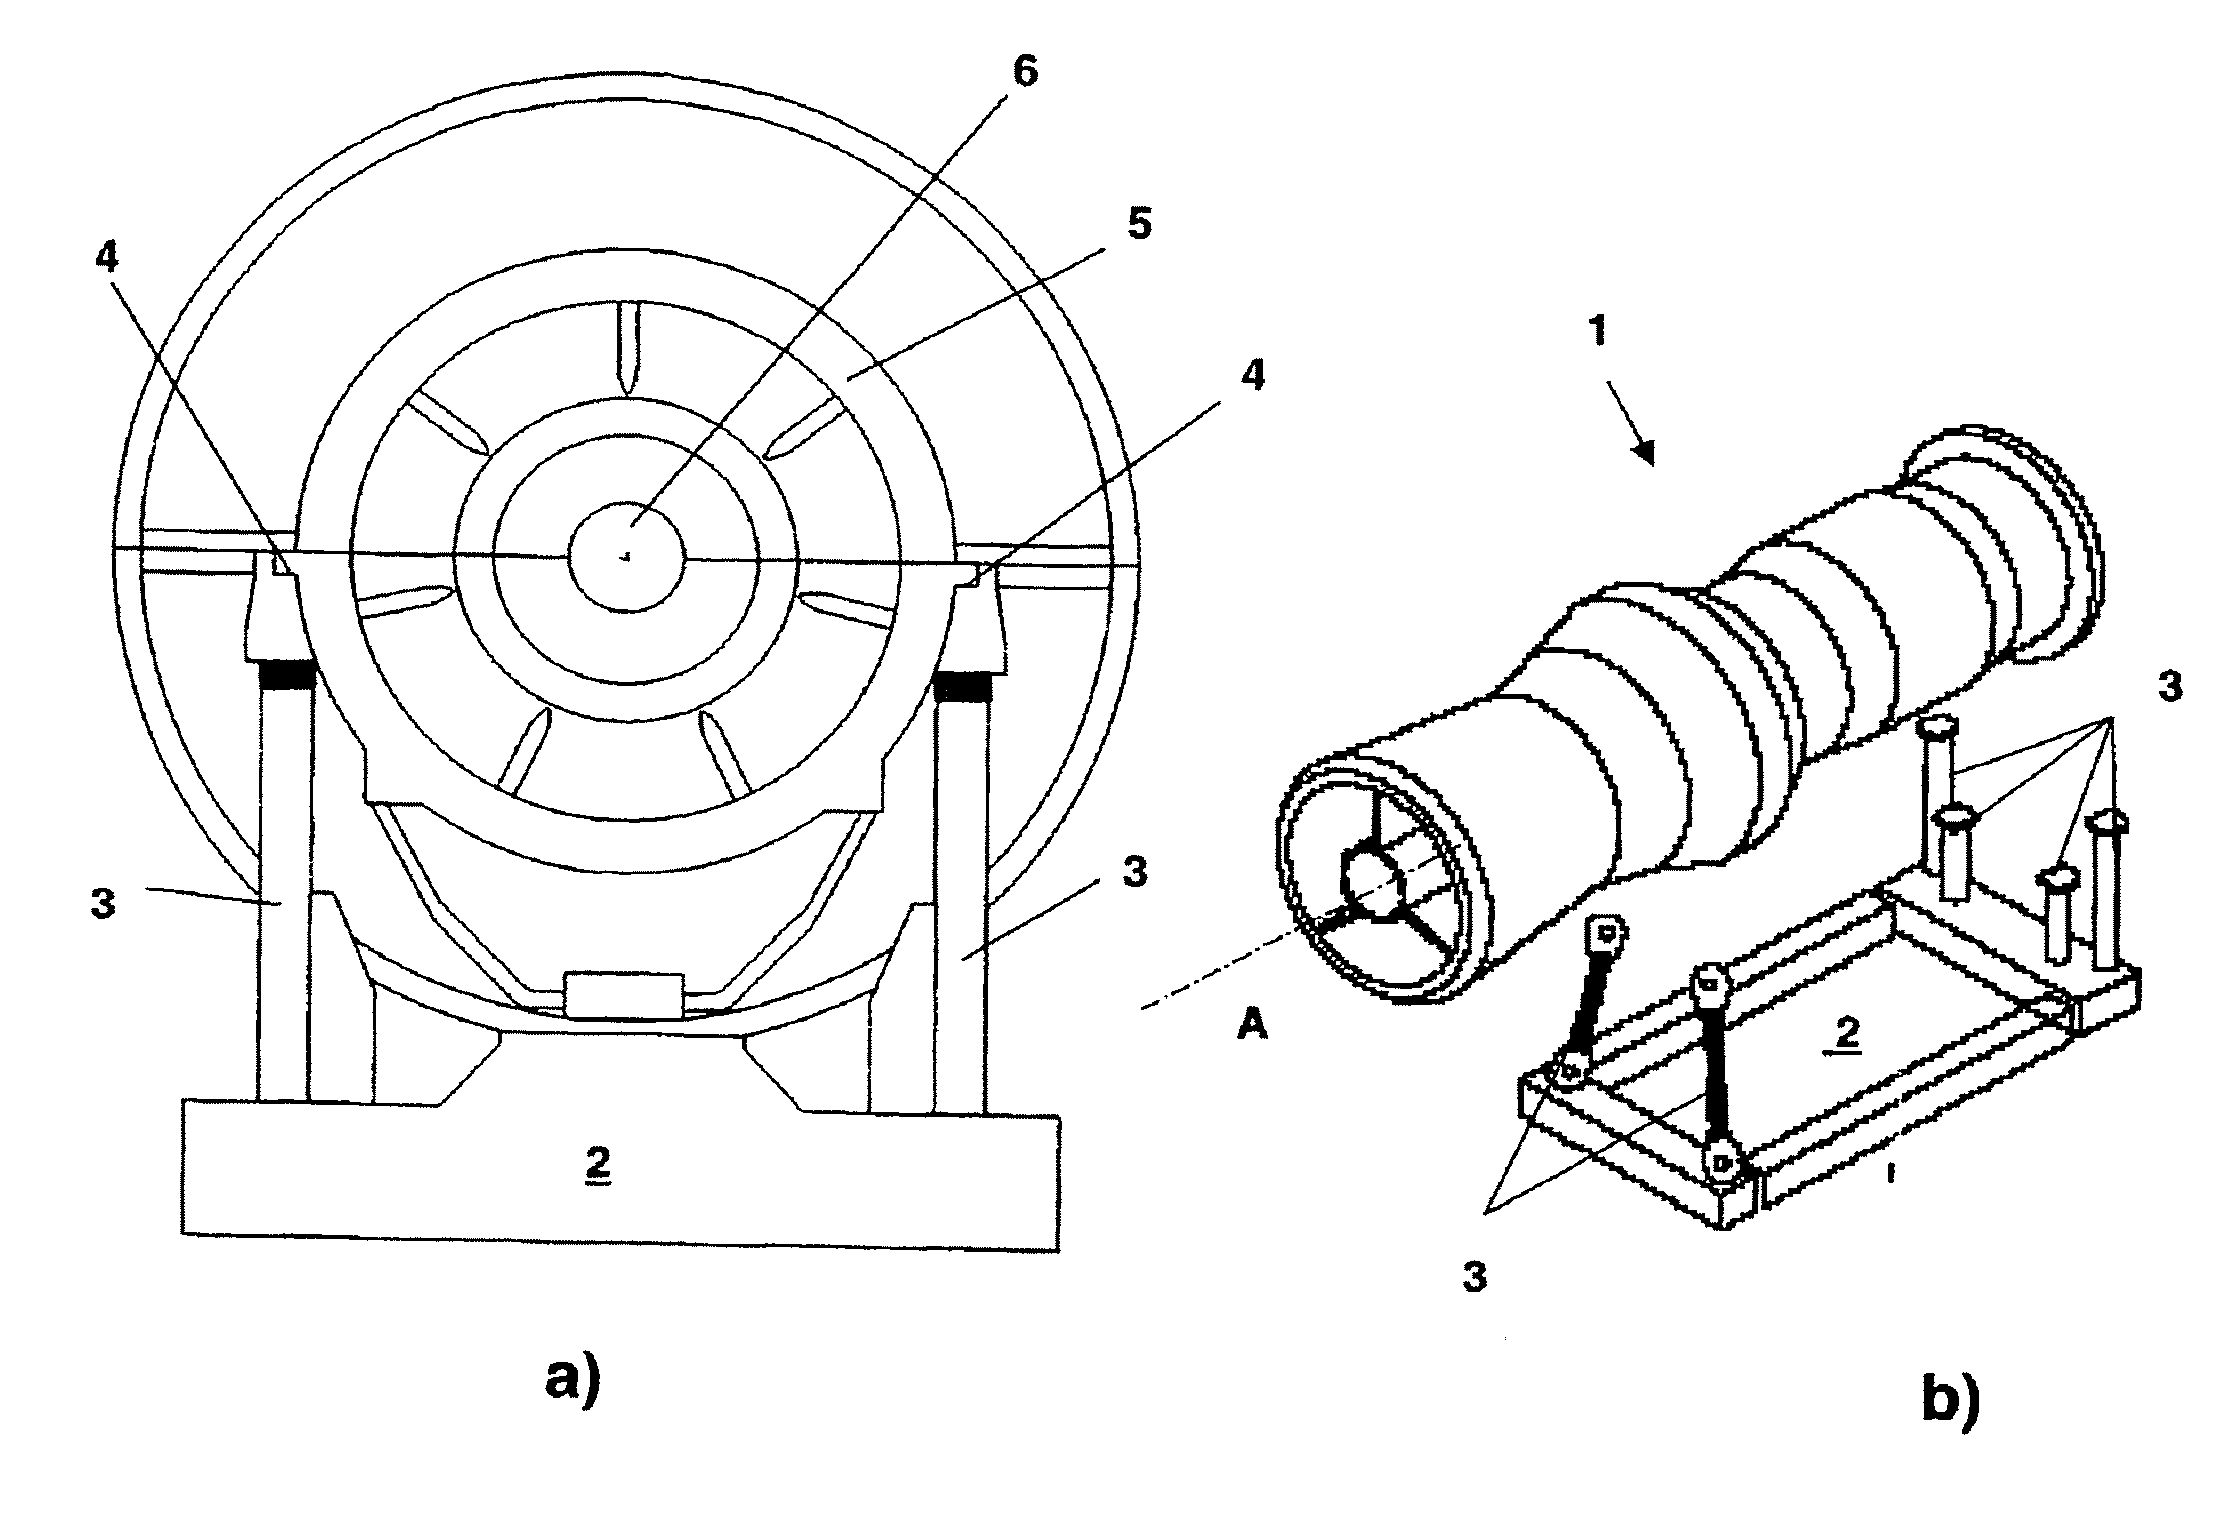 Device and method for mounting a turbine engine